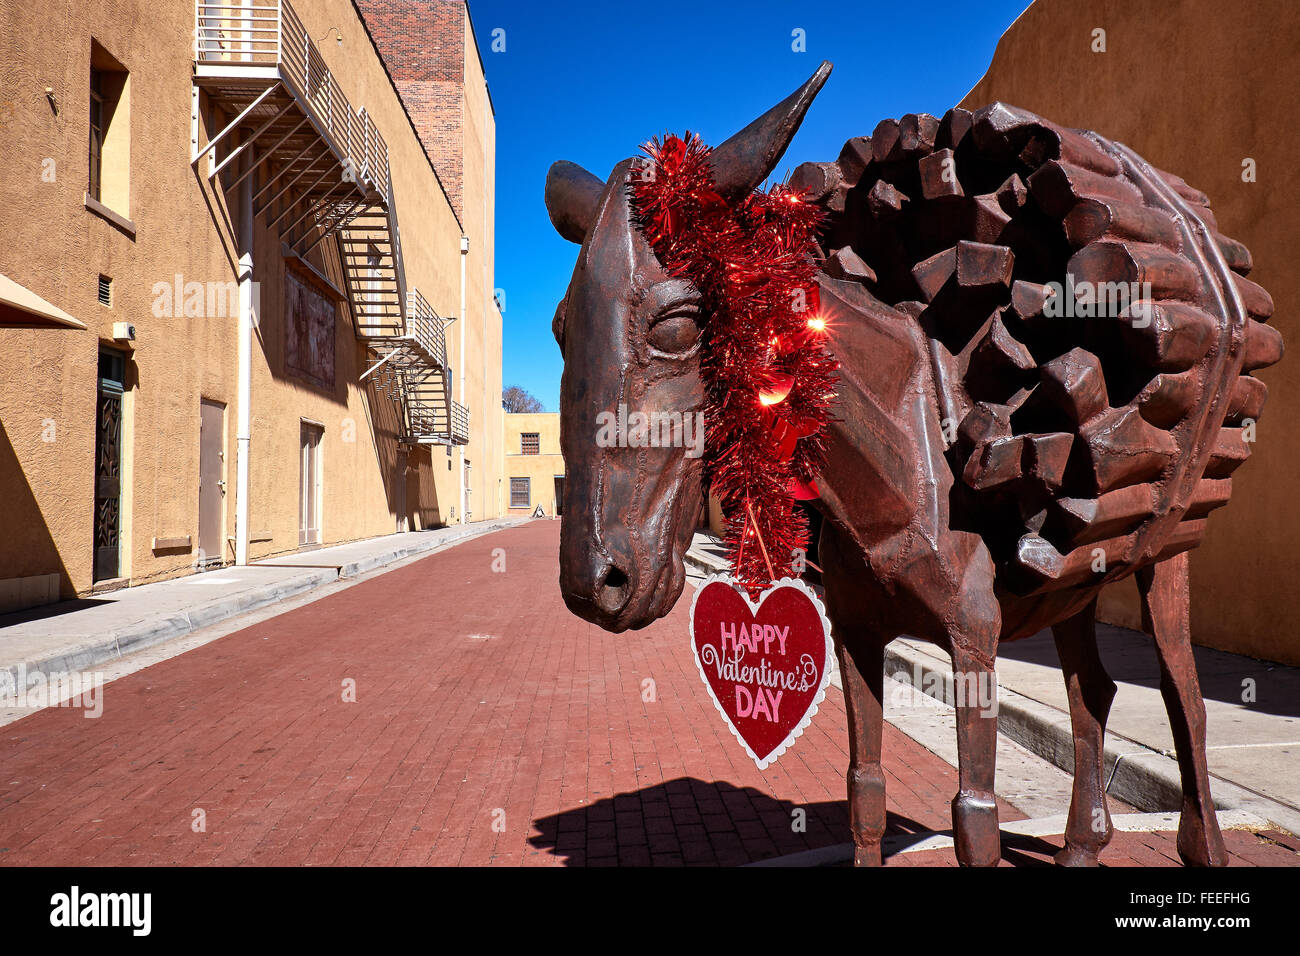 Sculpture in Burro Alley, Santa Fe, New Mexico, decorated for Valentine's Day Stock Photo